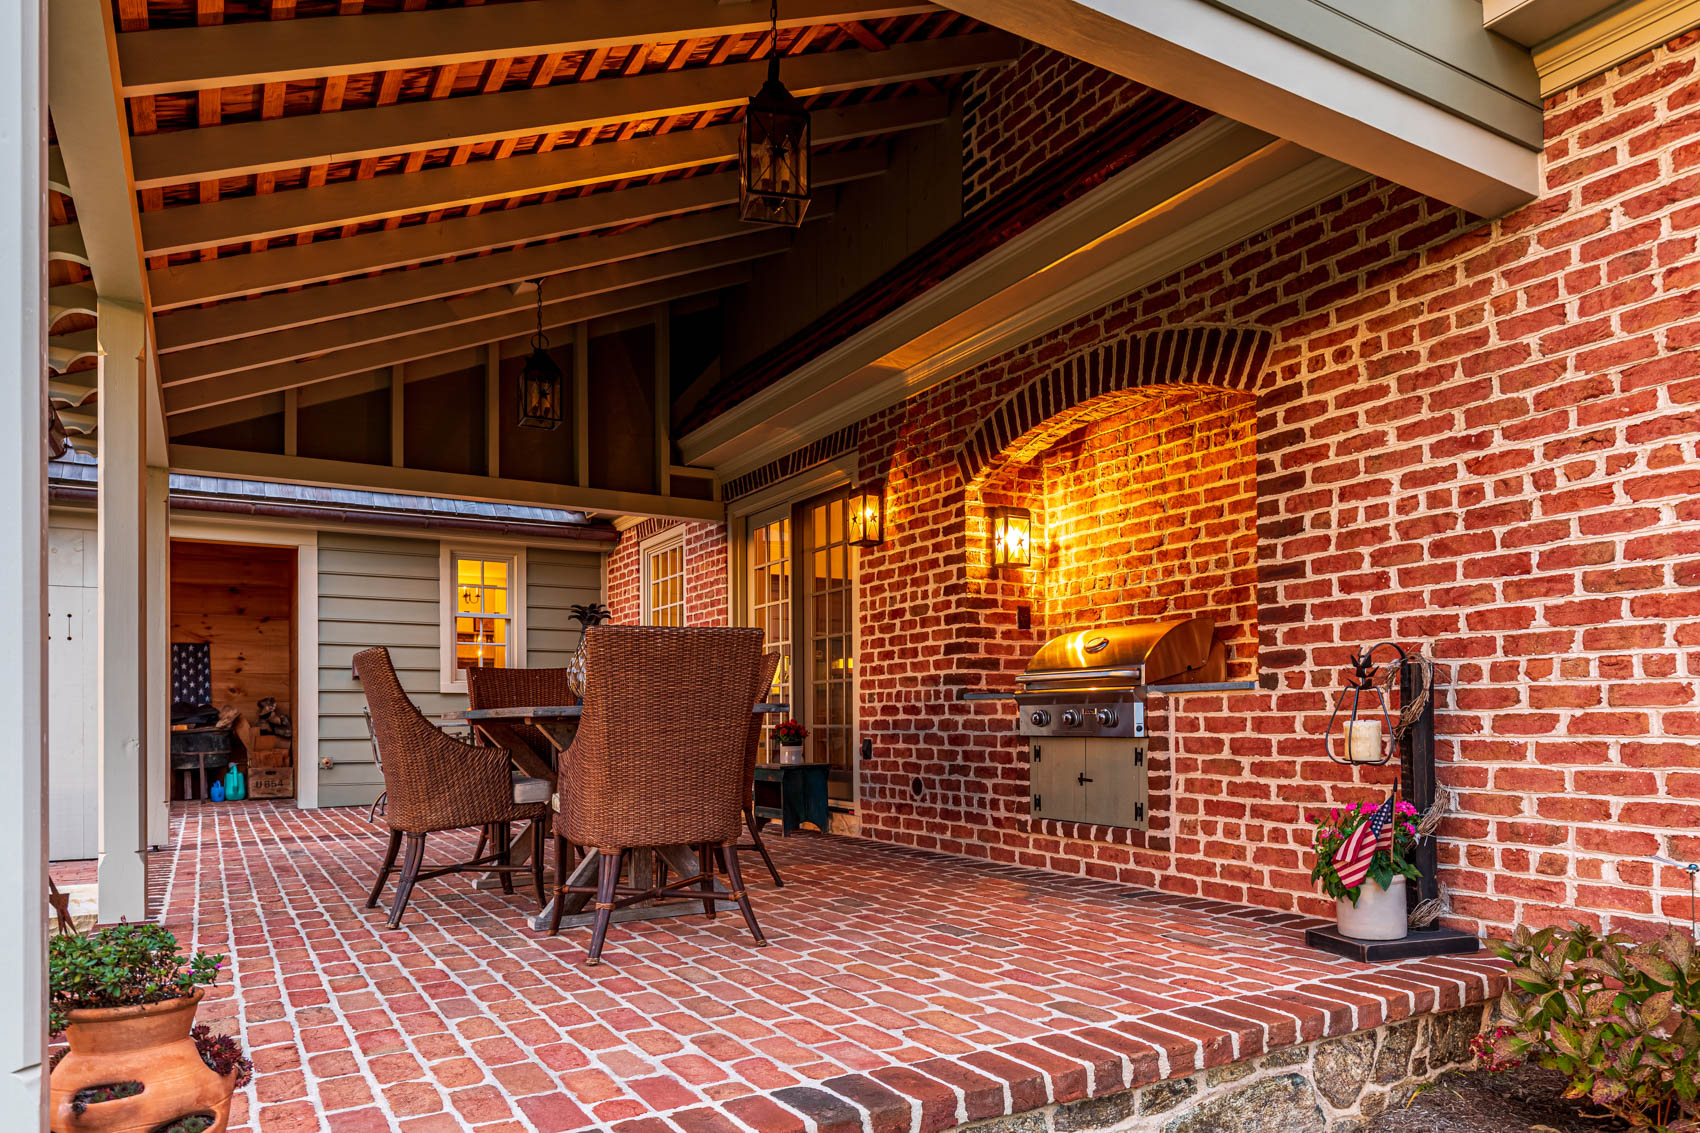 Brick patio with furniture and a fireplace in olde bulltown